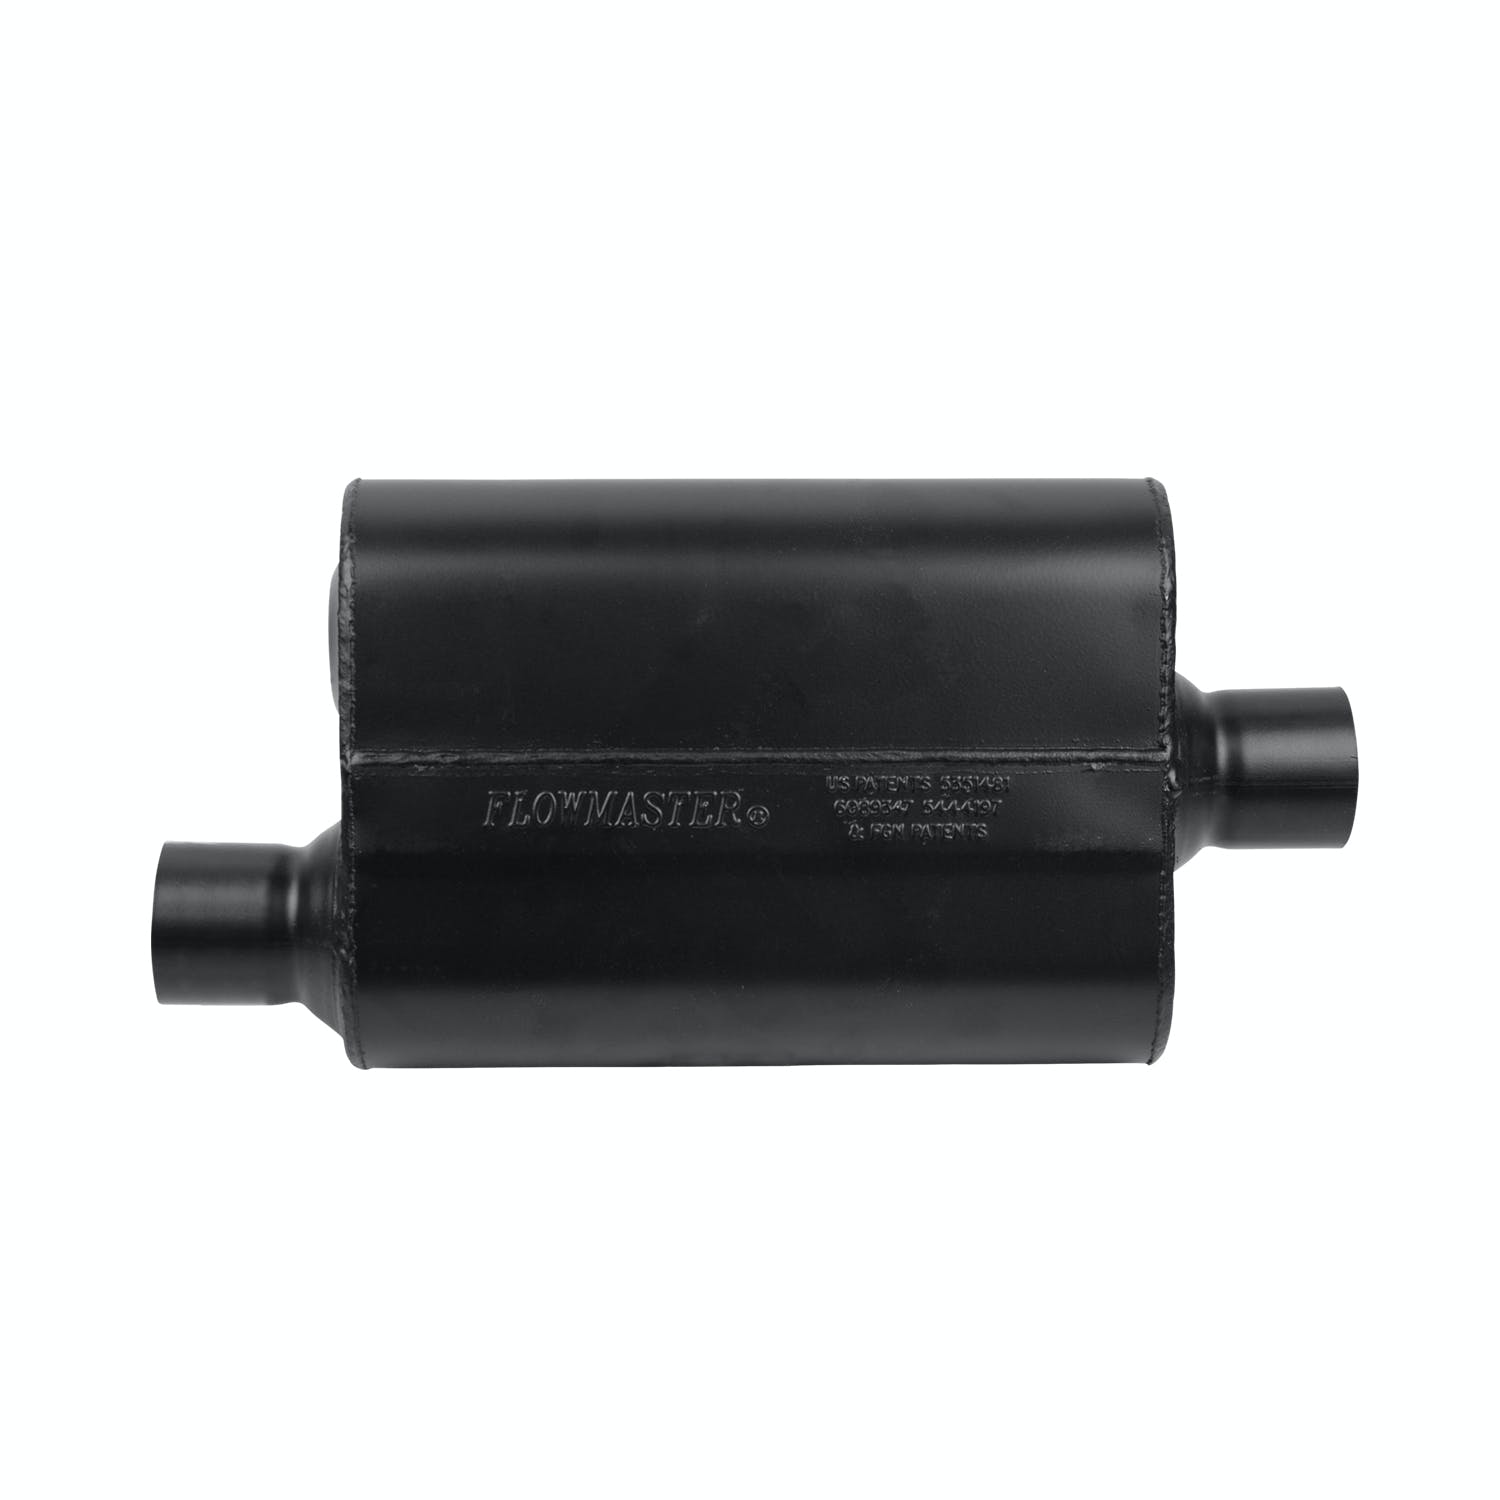 Flowmaster 942546 2.5 IN(O)/OUT(C) SUPER 44 SERIES